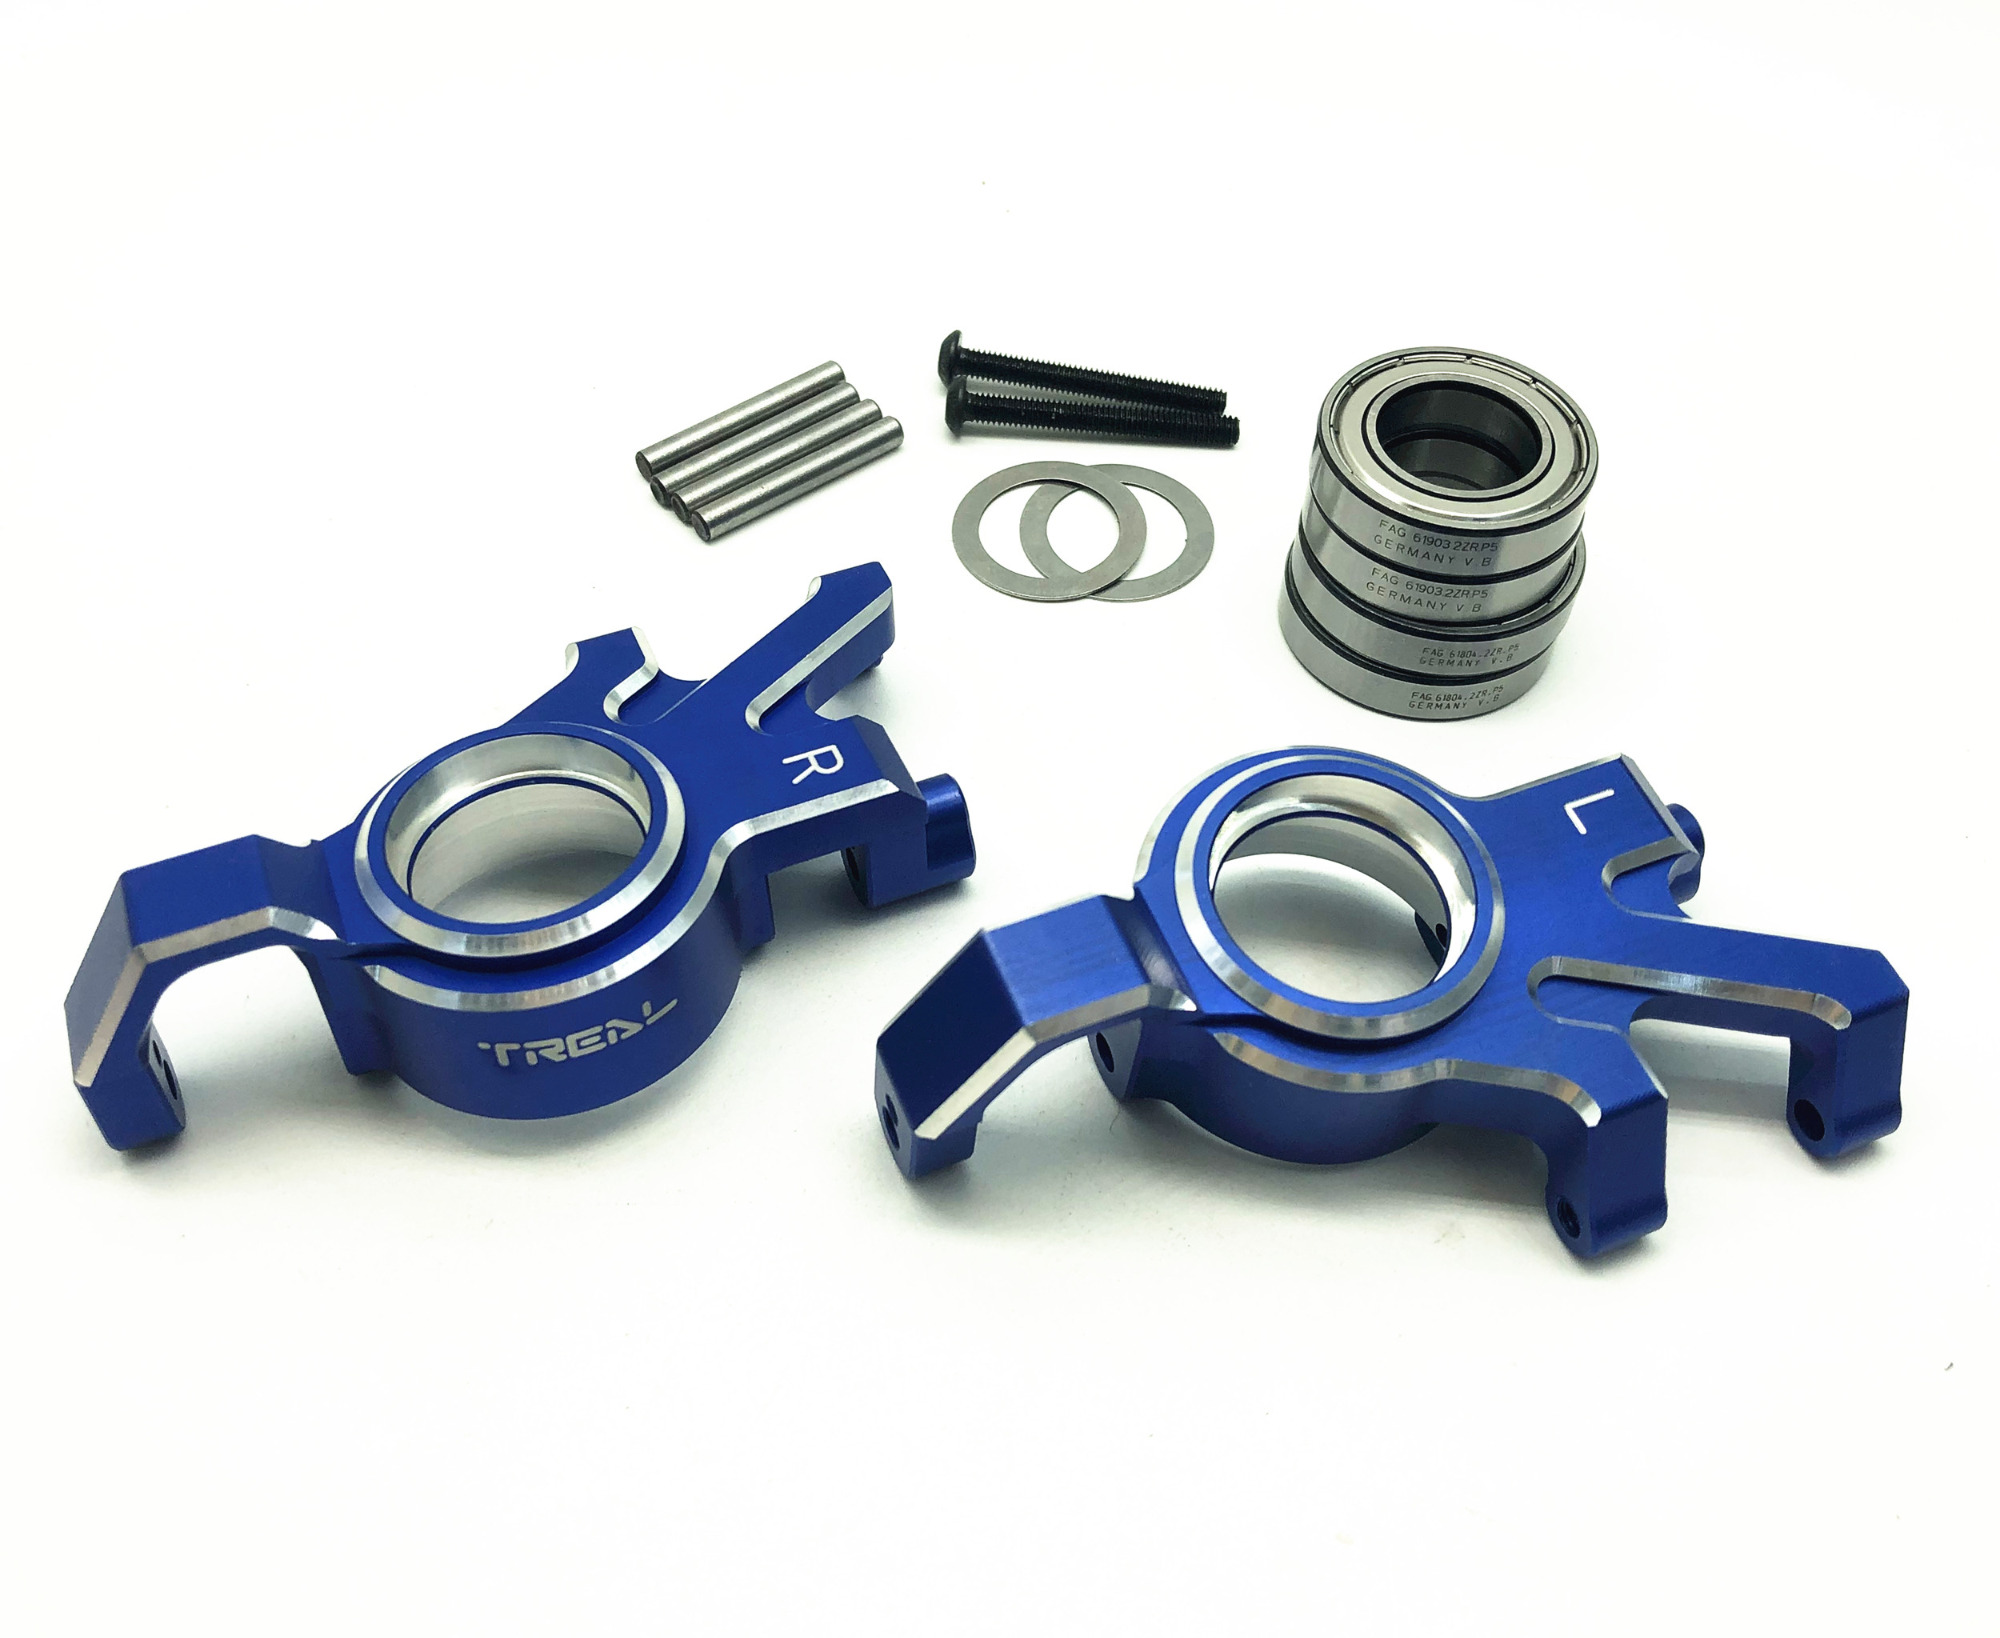 Details about   Treal Traxxas Maxx Blue Aluminum Front Steering Knuckle Arms W/ Bearings